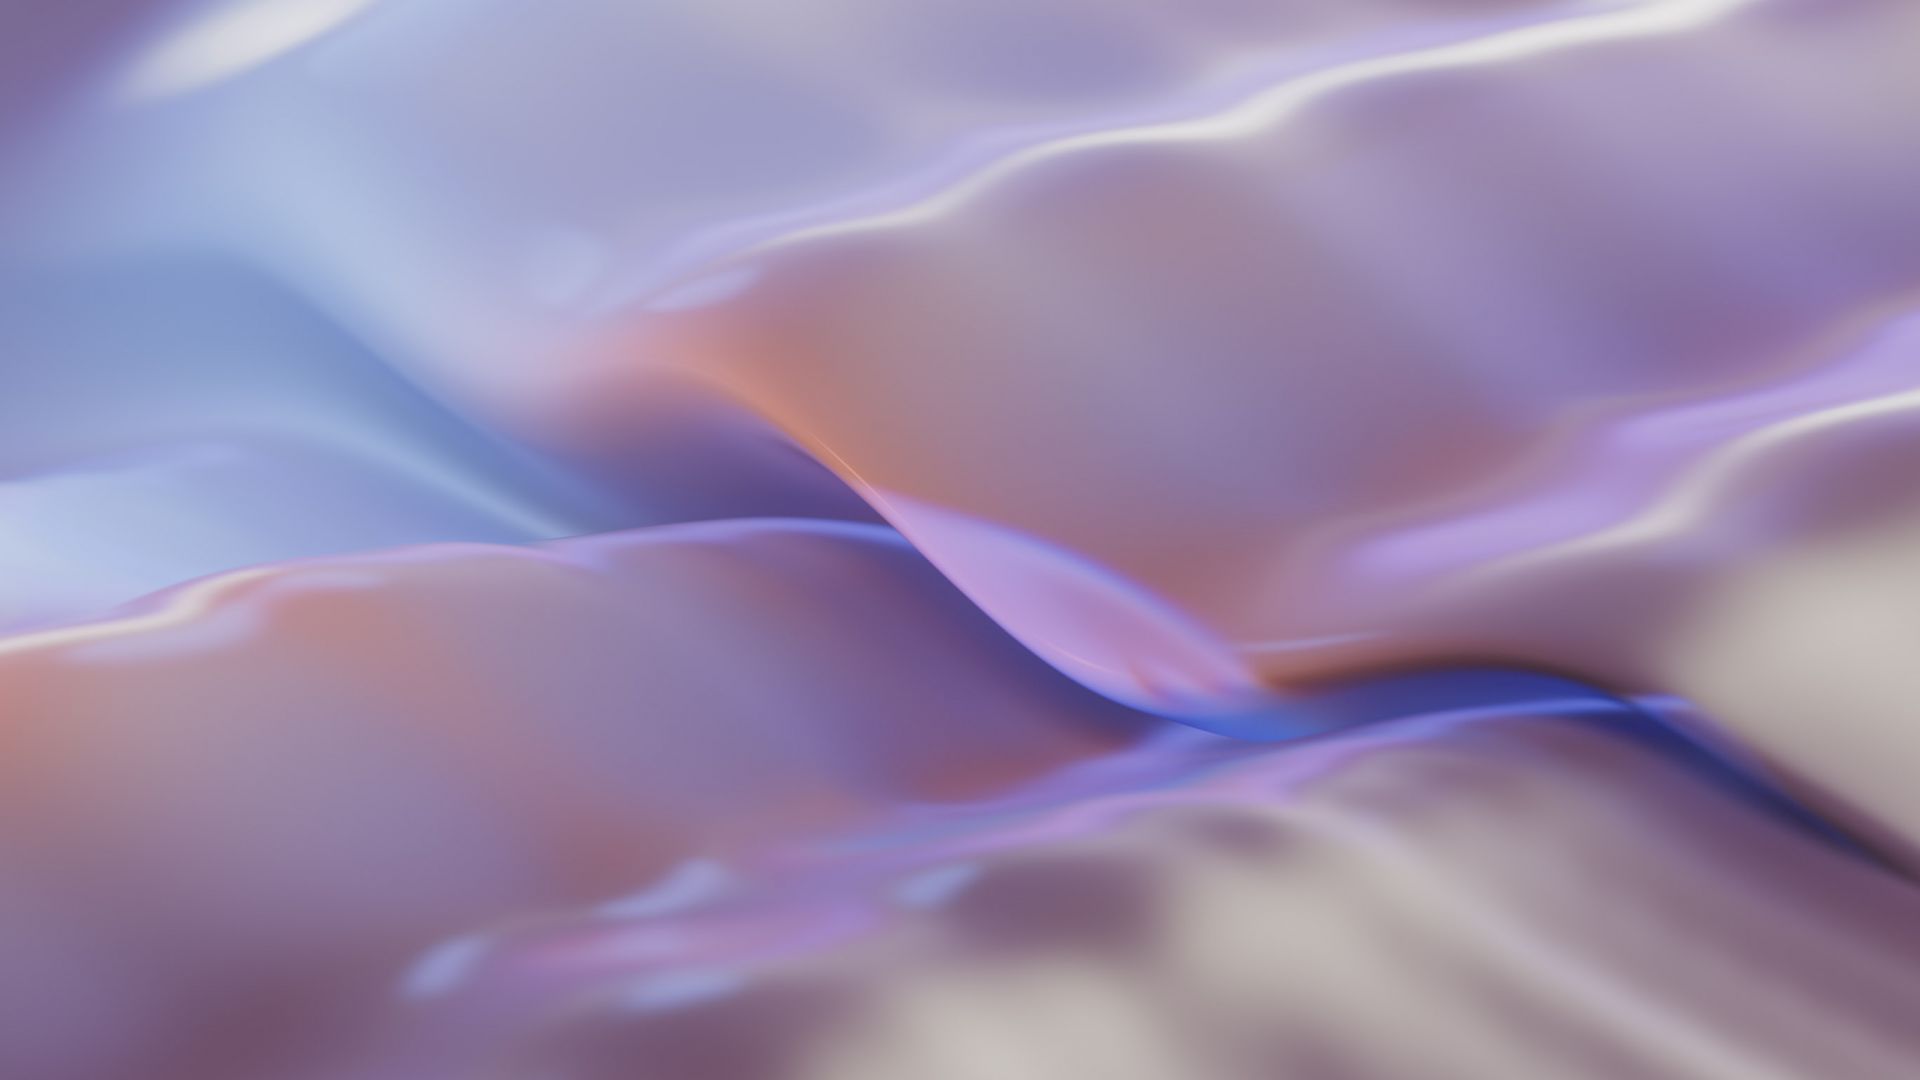 Windows 11 Style Abstract Wallpapers